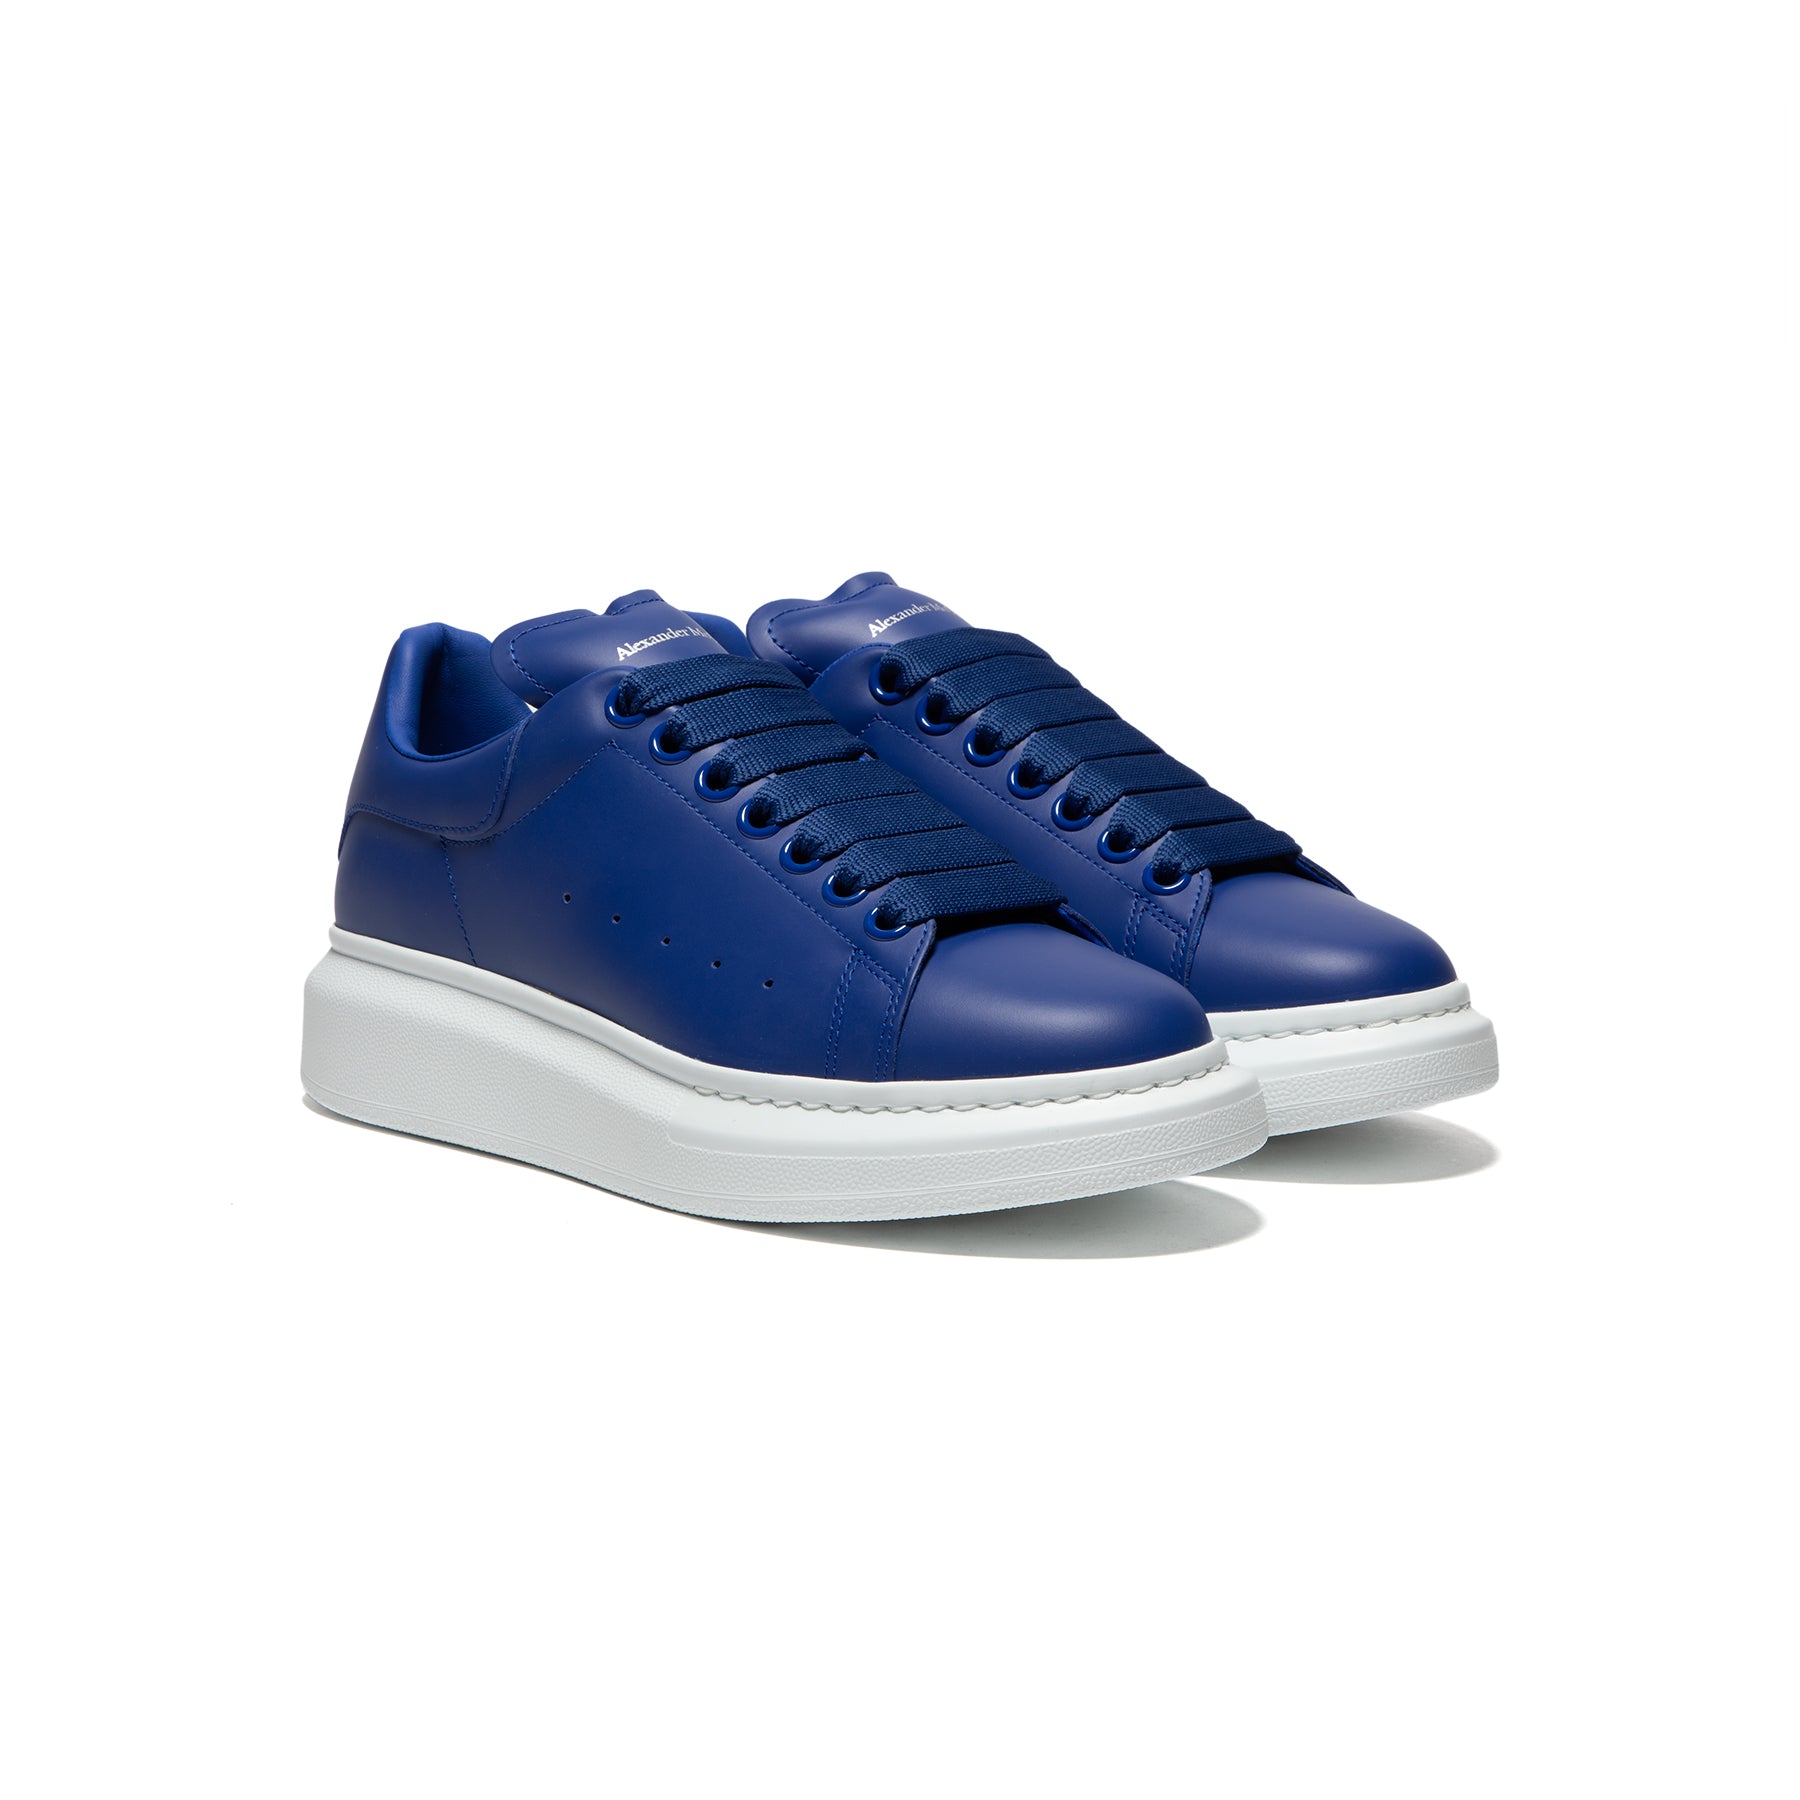 Alexander McQueen Alexander McQueen Exaggerated Sole Leather Sneakers  White/Electric Blue